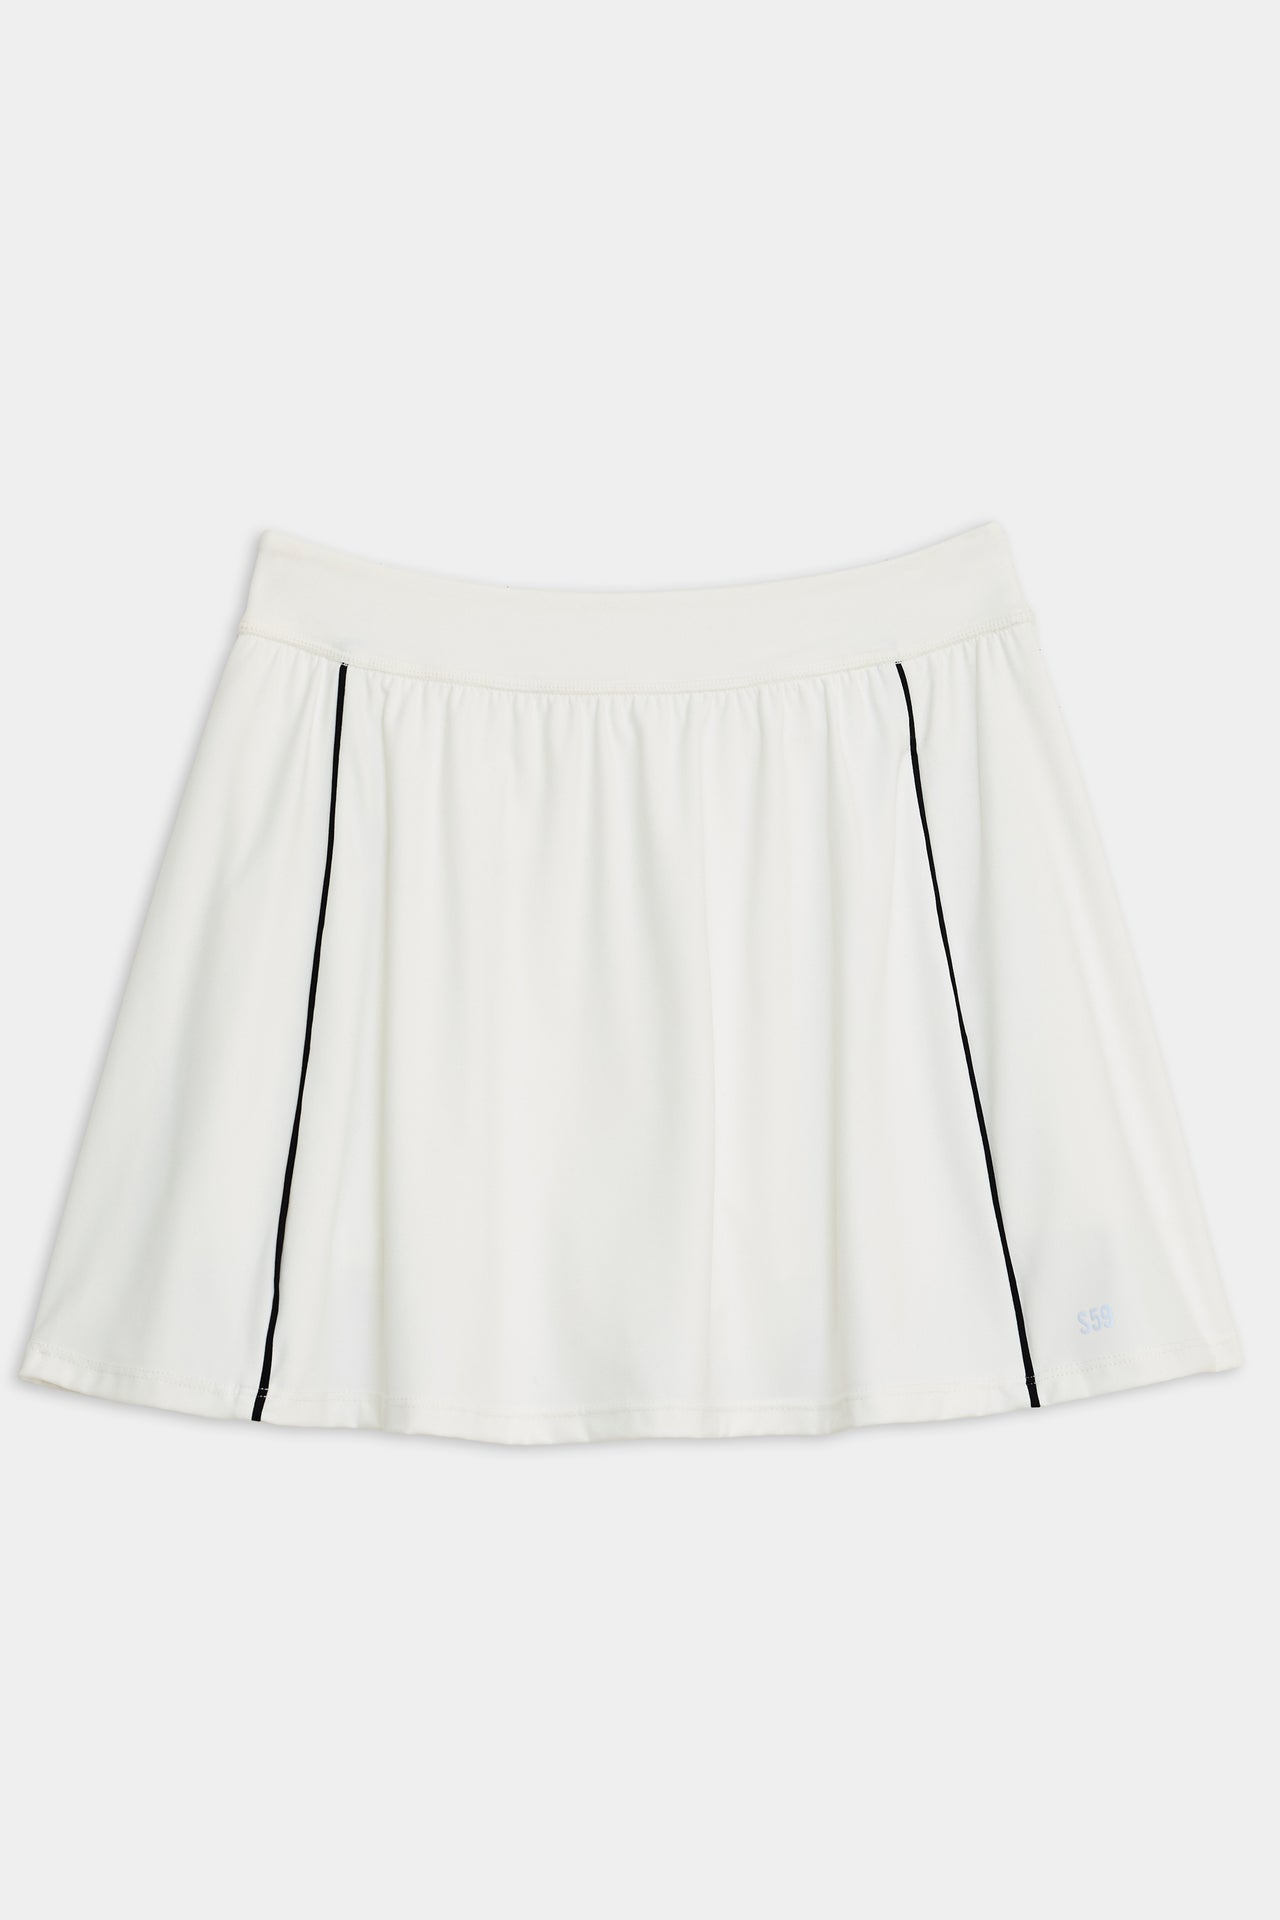 A white pleated sports skirt with black trim detailing, made of nylon and spandex, like the SPLITS59 Venus High Waist Rigor Skort w/Piping in White.